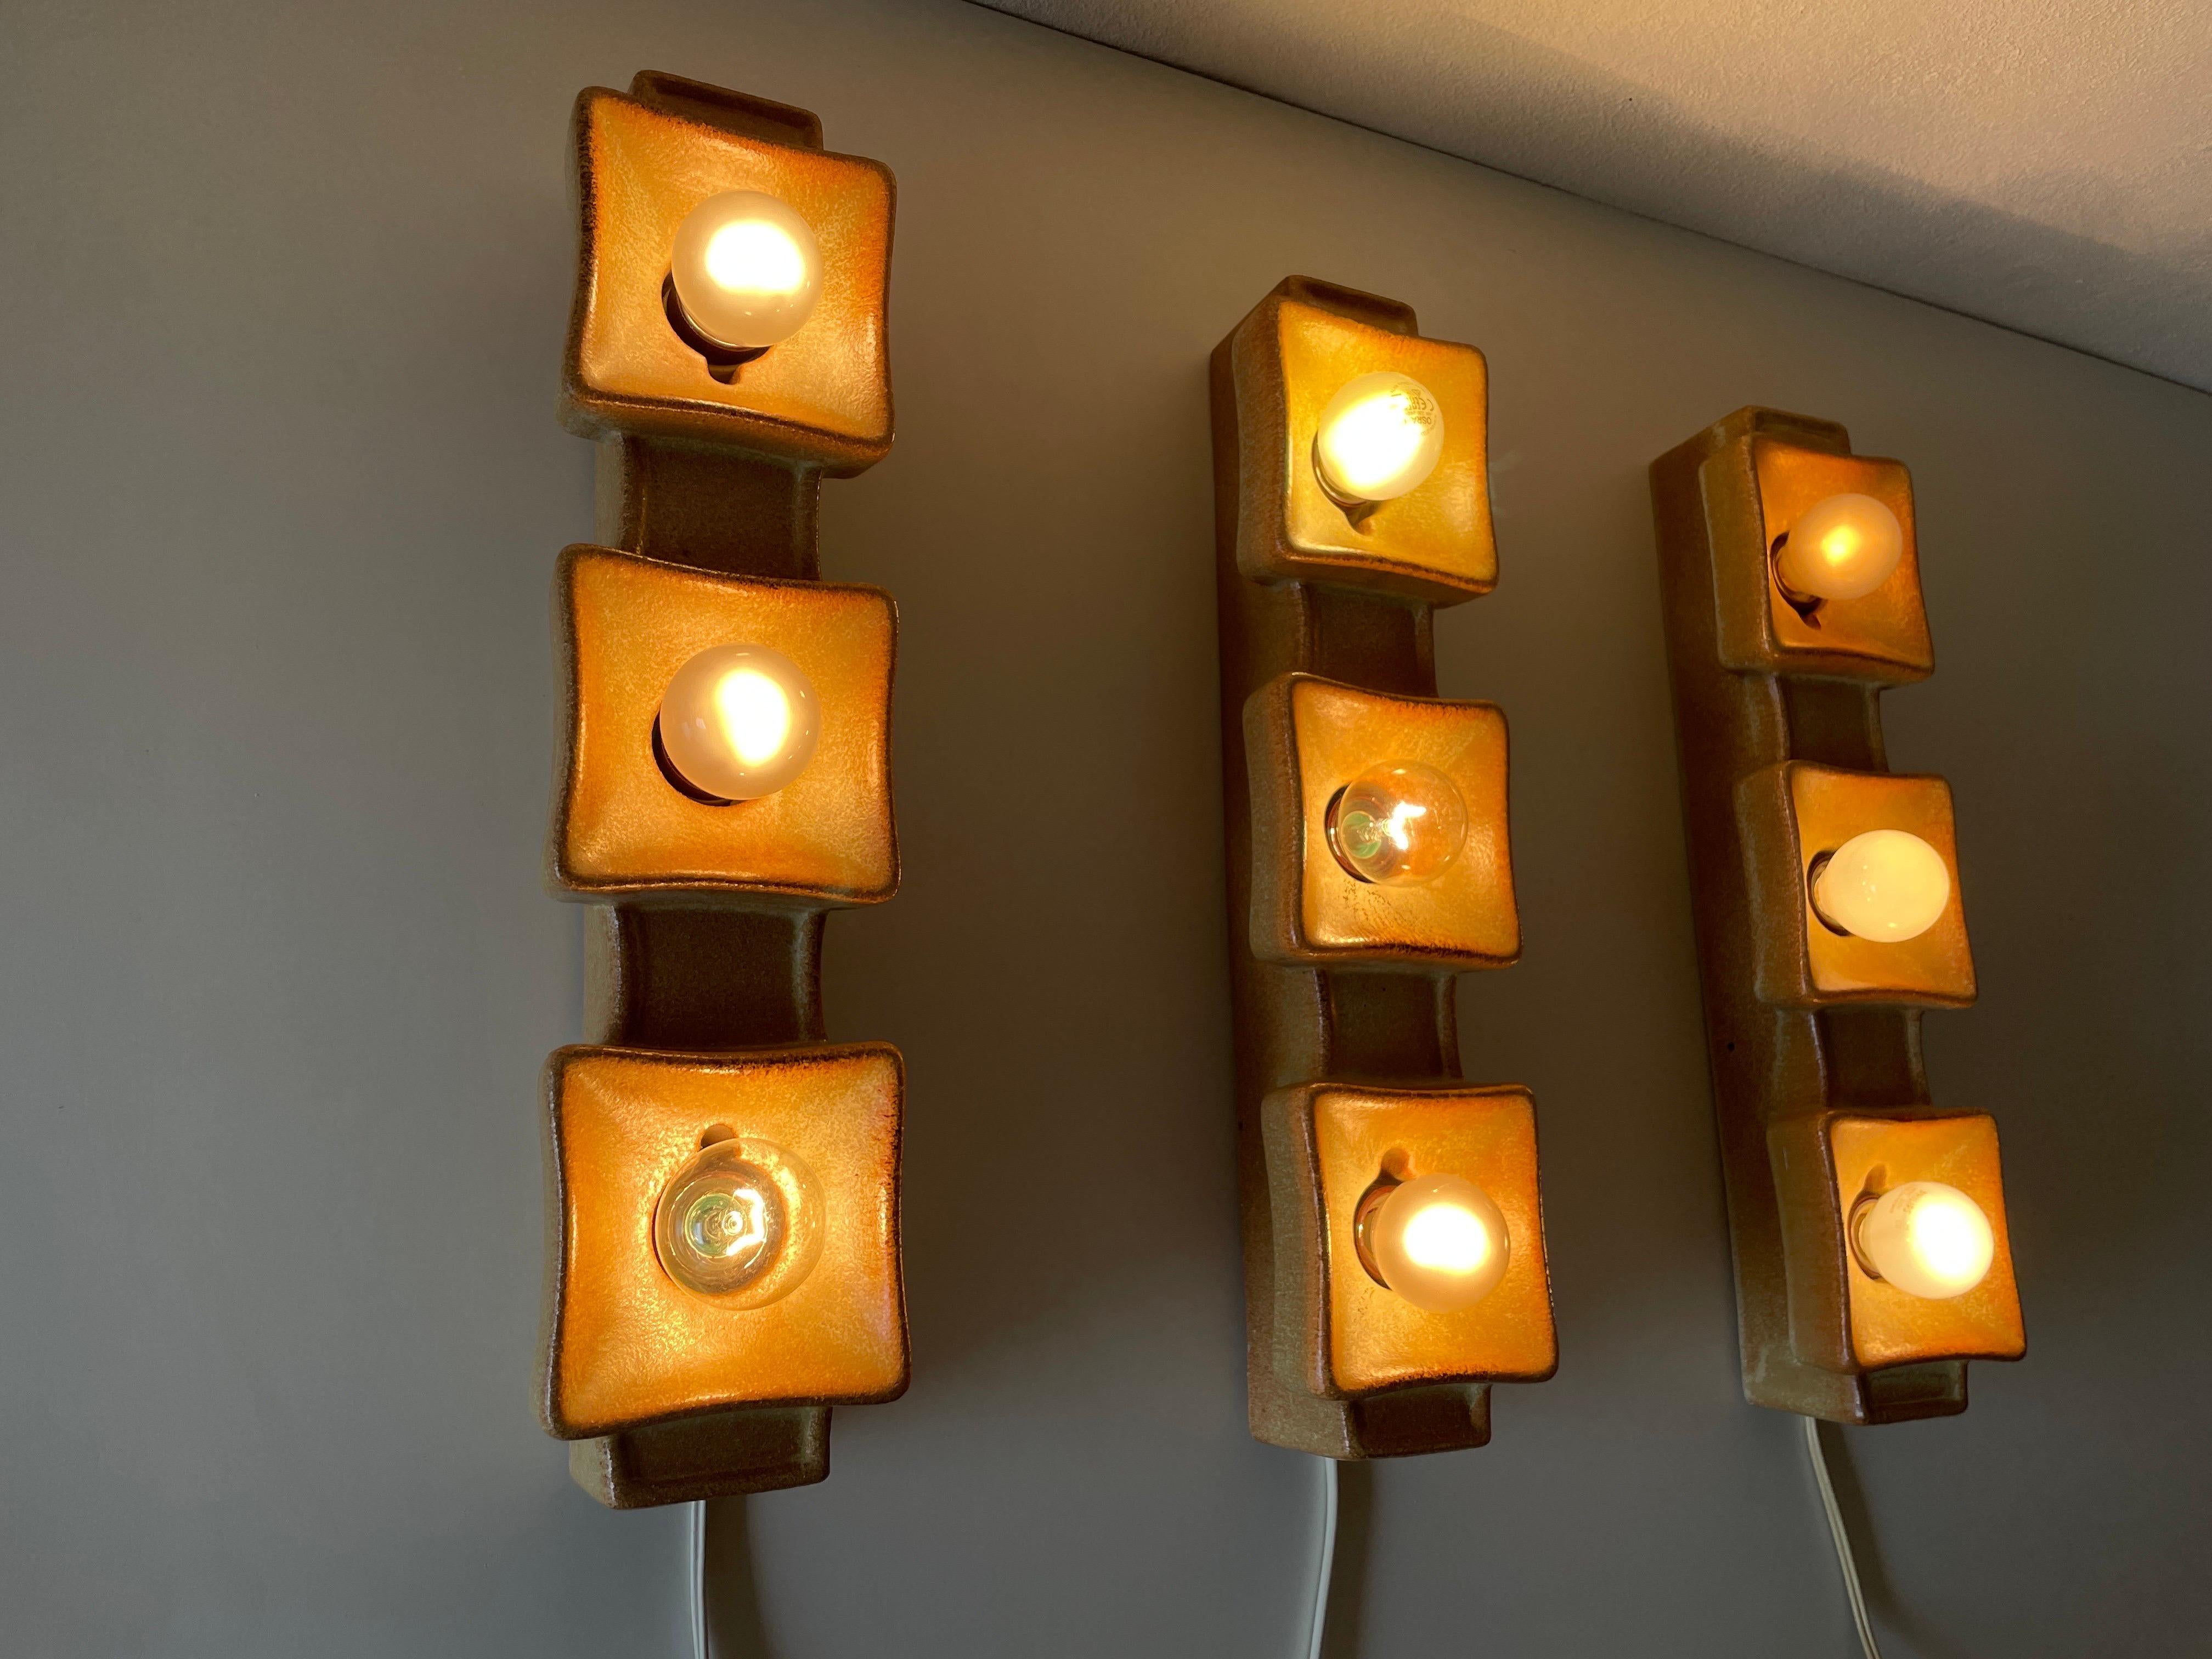 Brown Ceramic Set of 3 Sconces by Pan Leuchten, 1970s, Germany For Sale 5